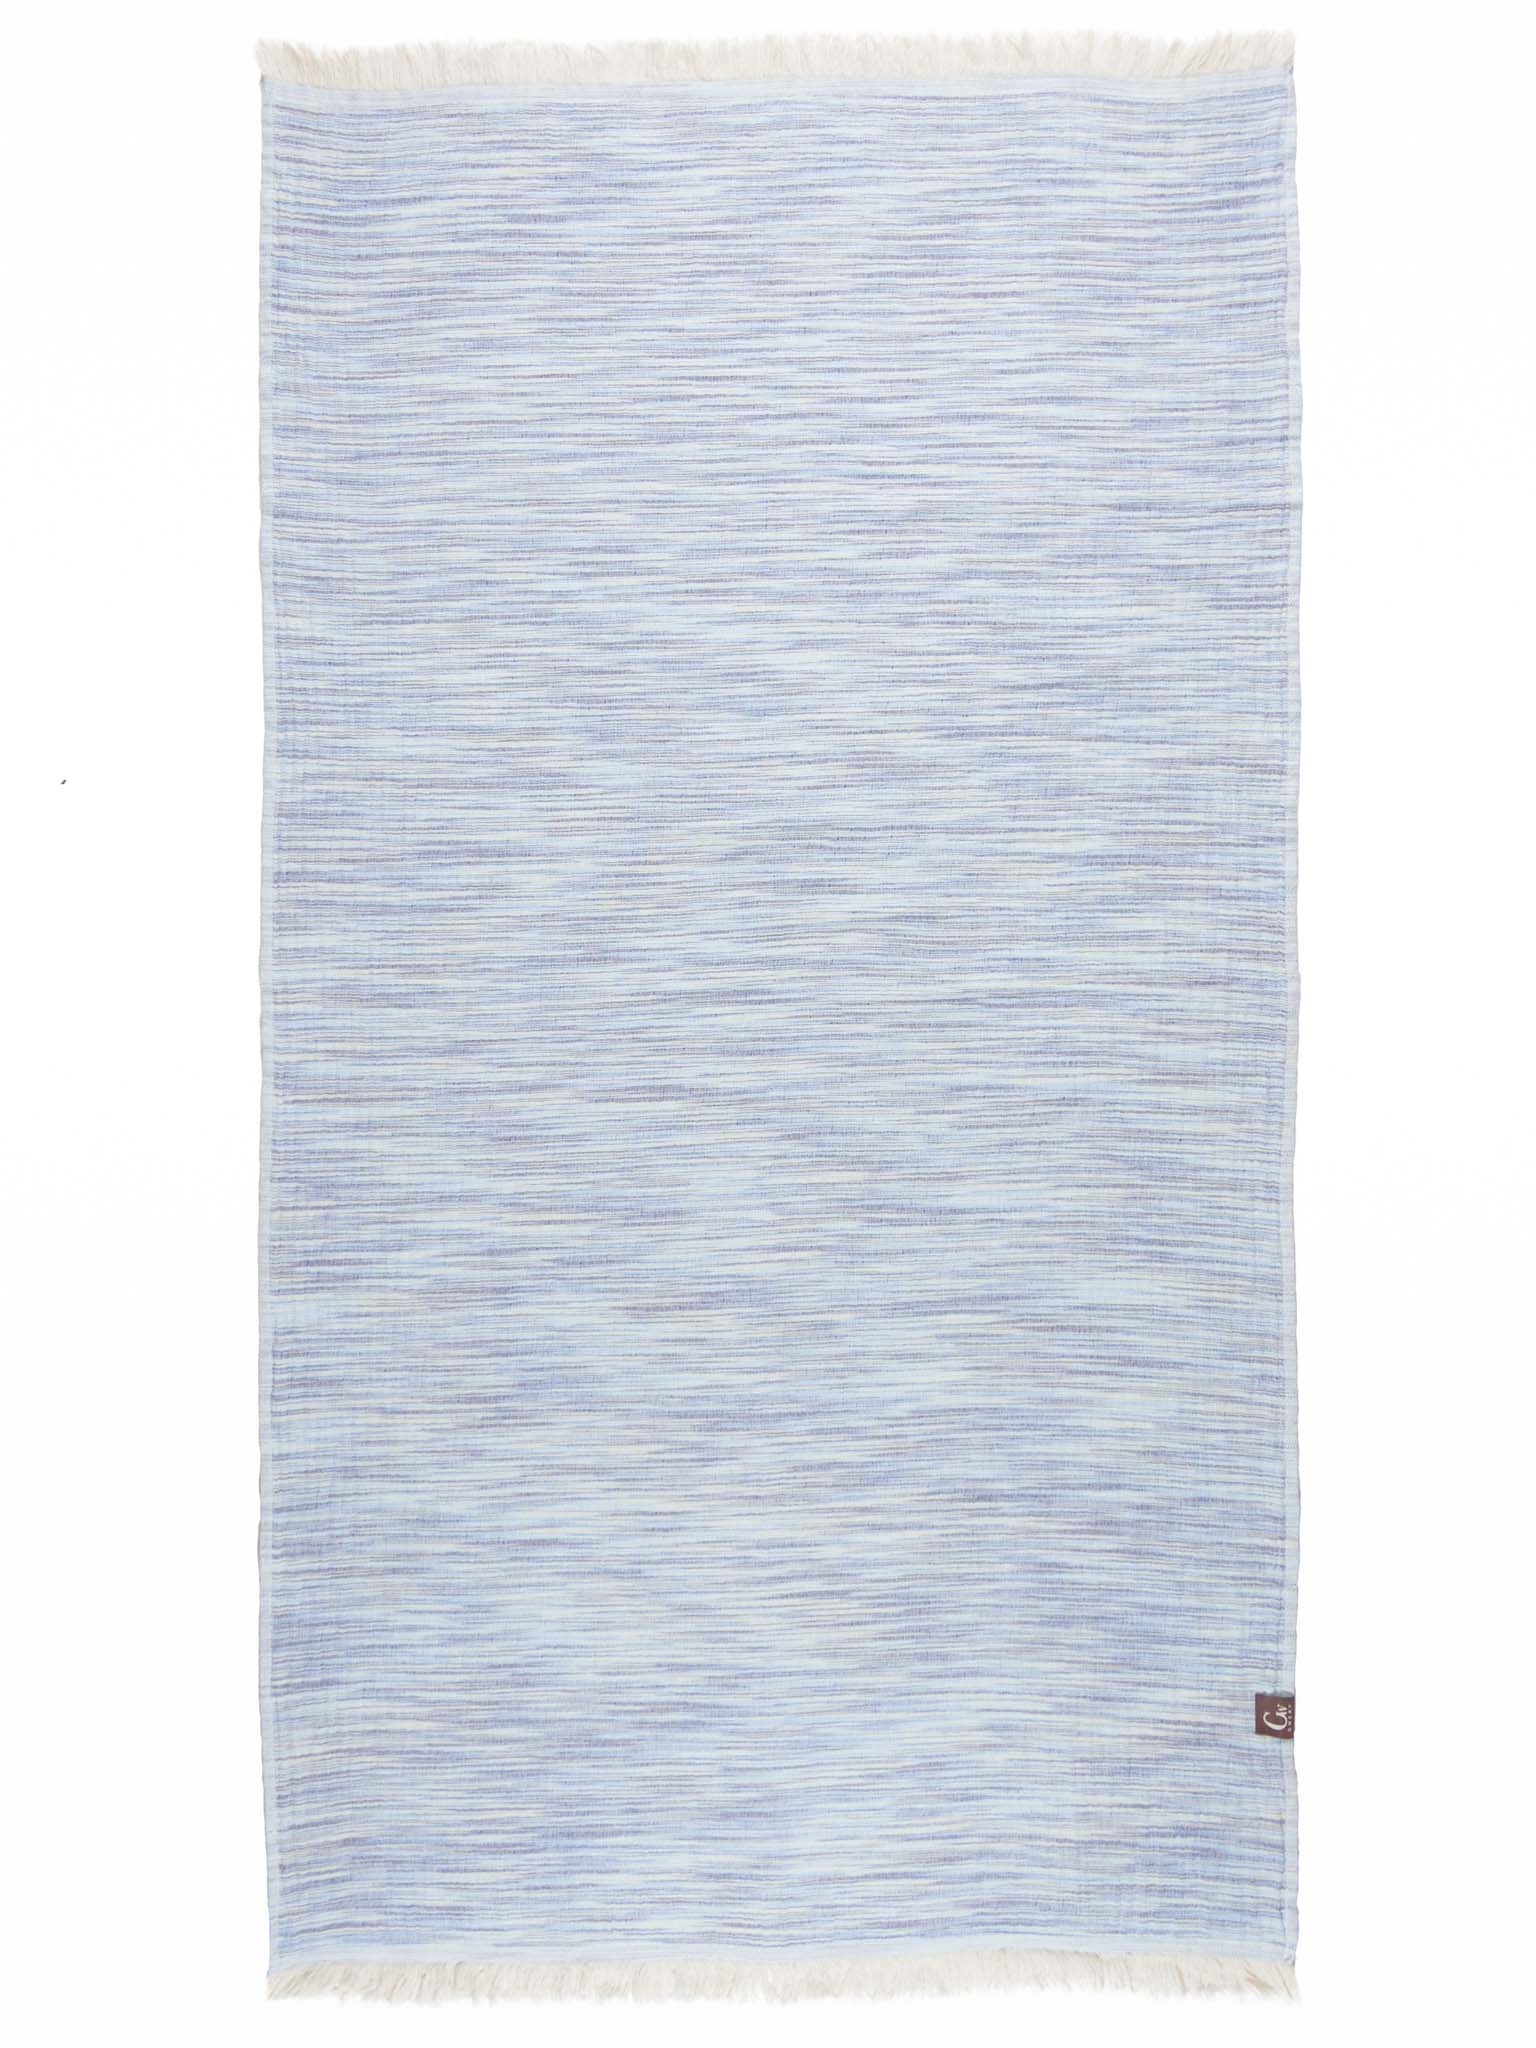 Blue patterned double sided beach towel open up